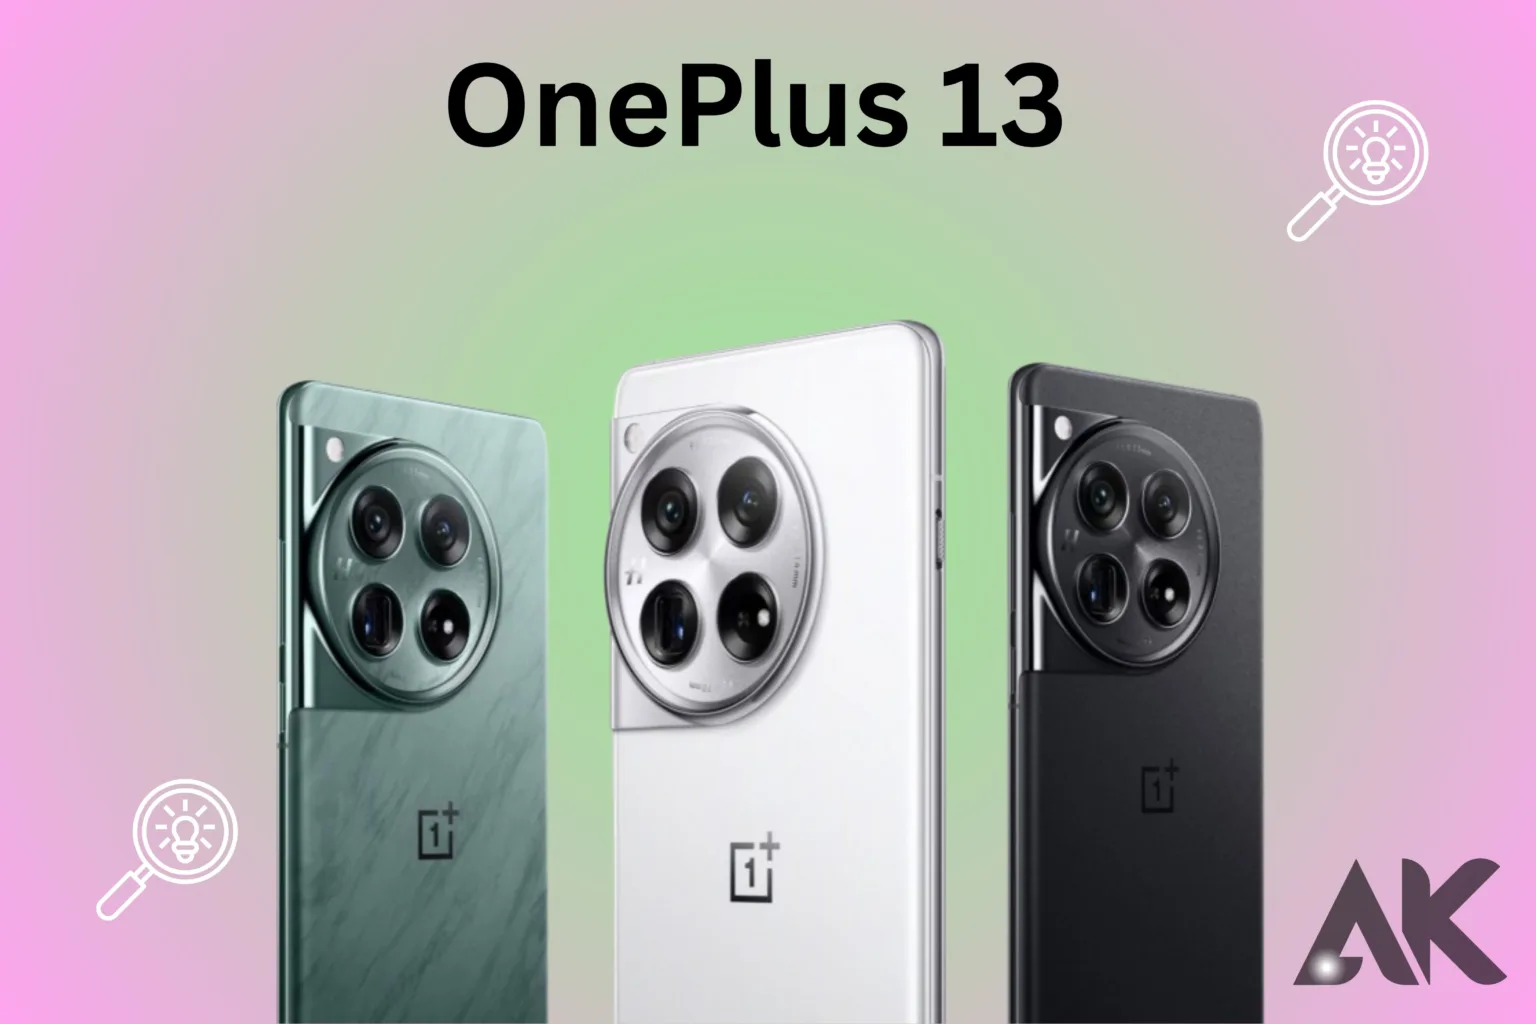 OnePlus 13 release date